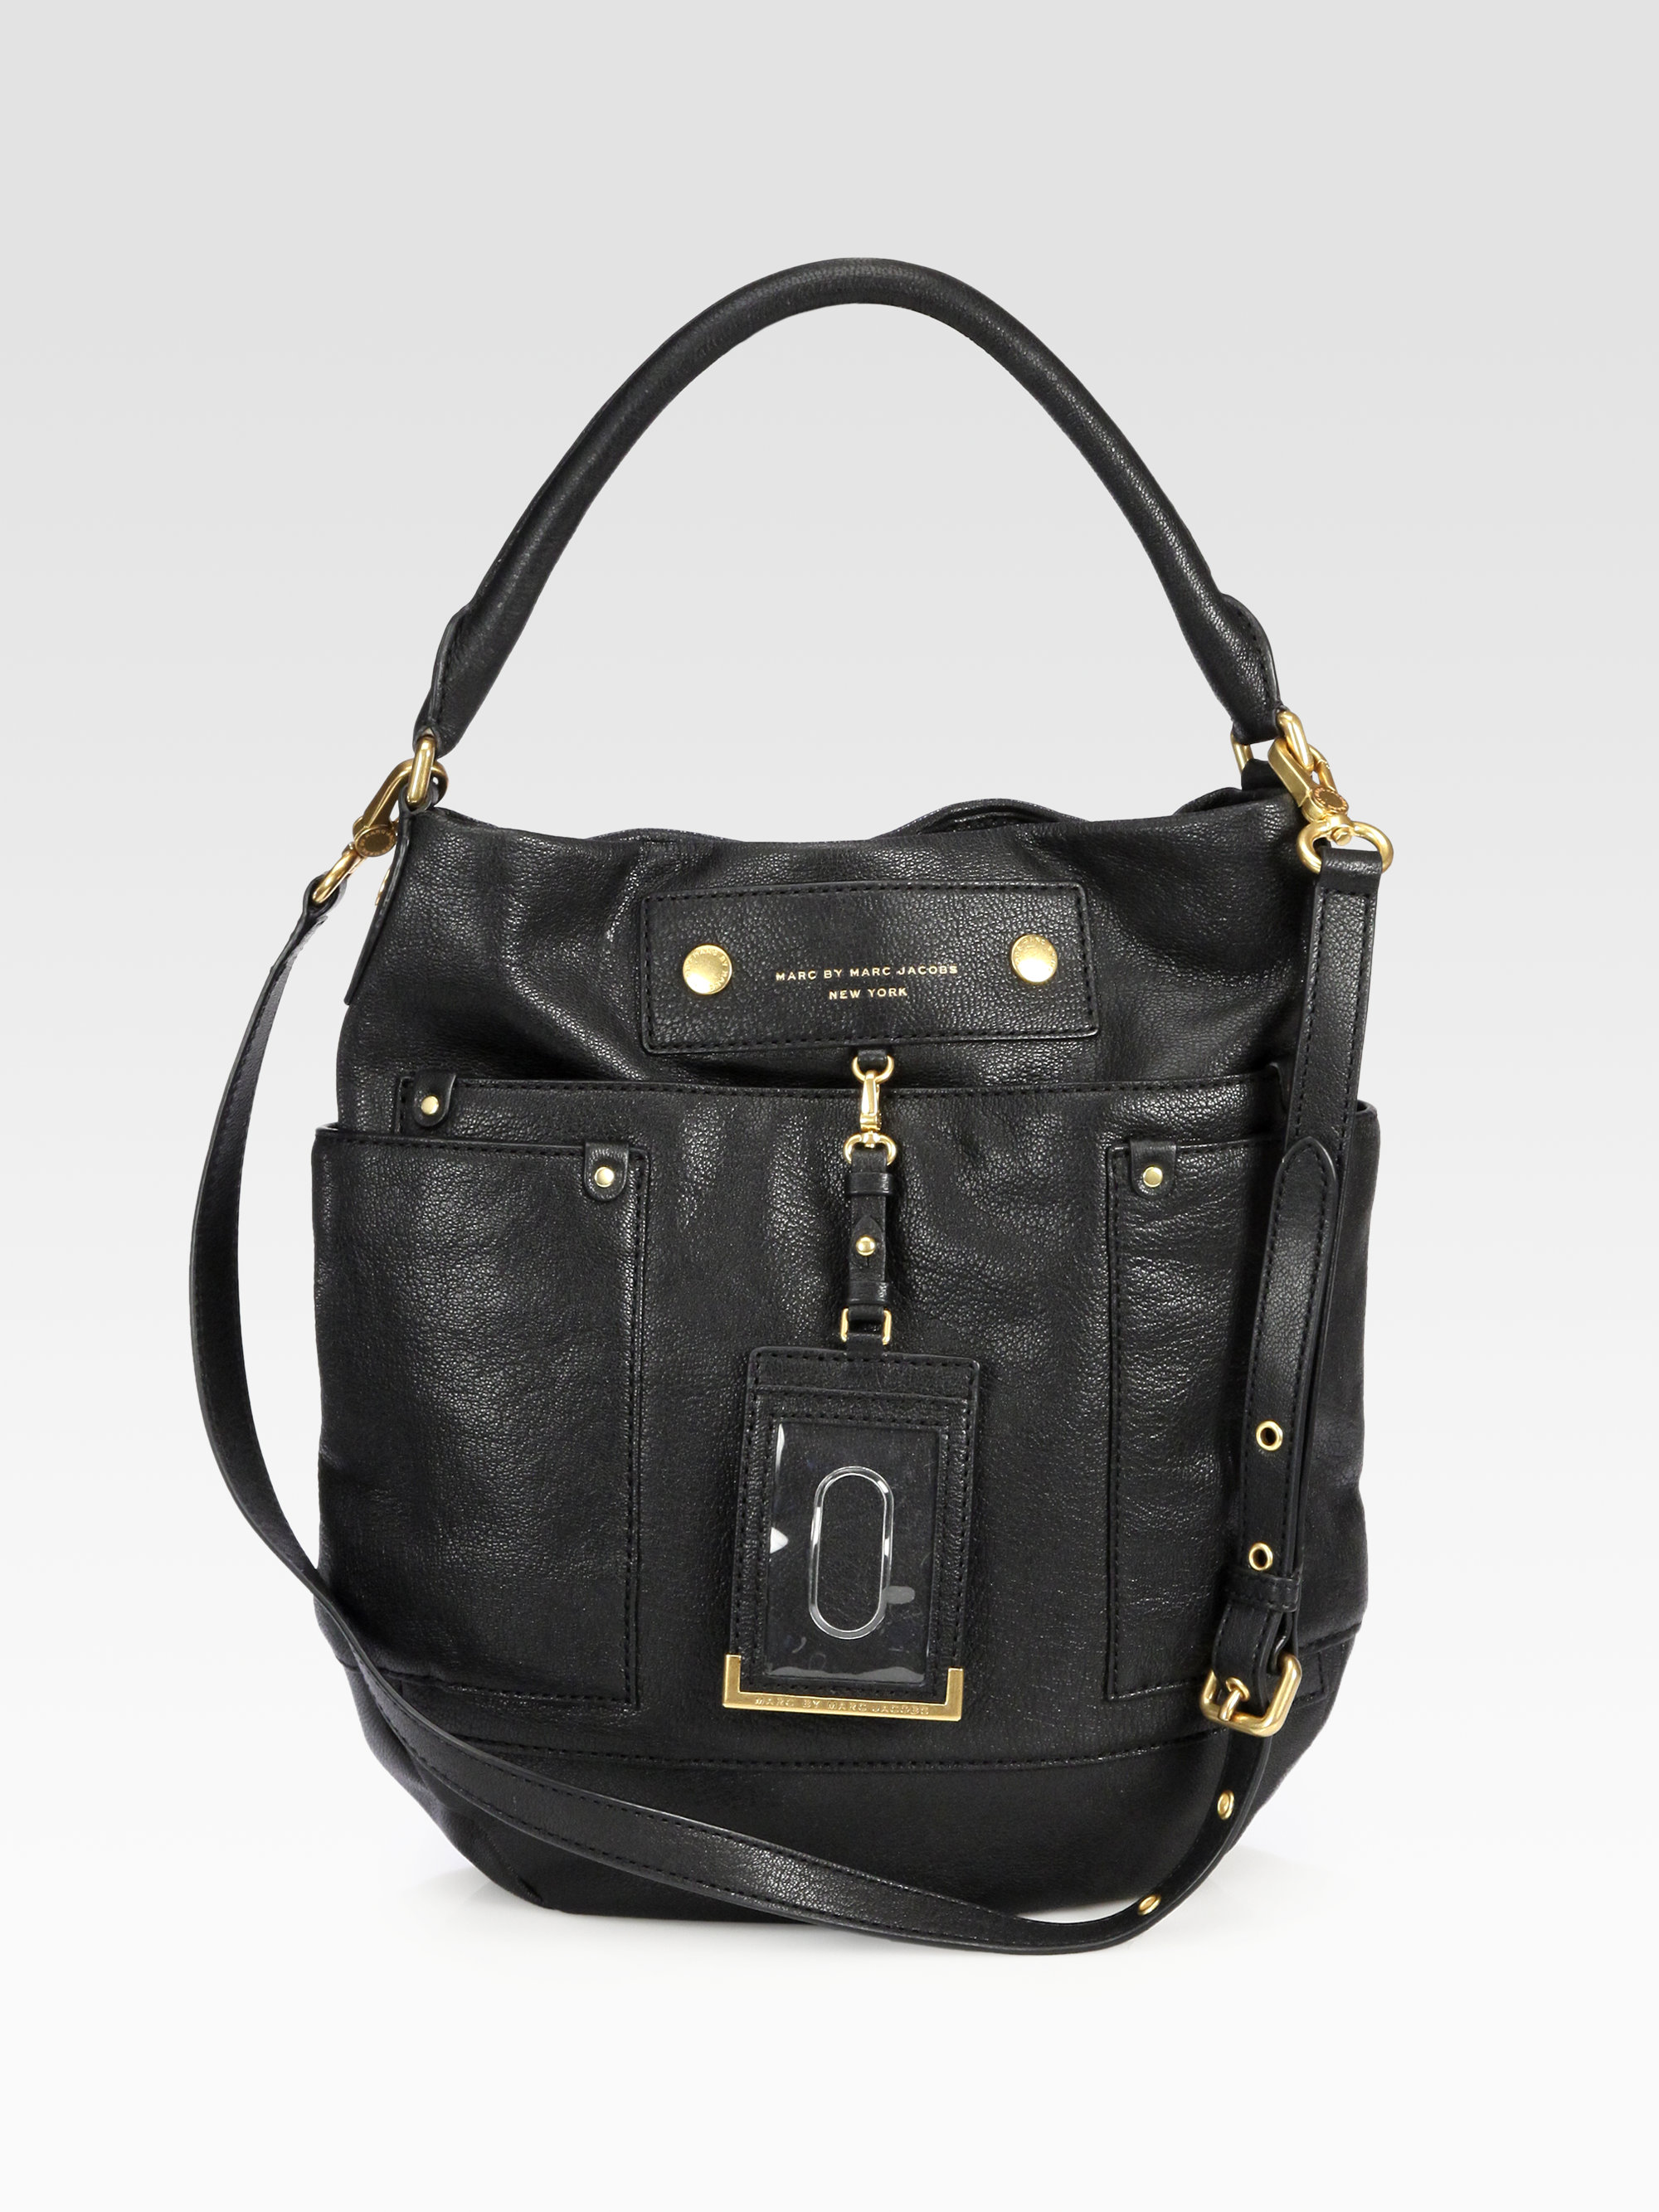 Marc By Marc Jacobs Preppy Leather Hobo Bag in Black-Brass (Black) - Lyst